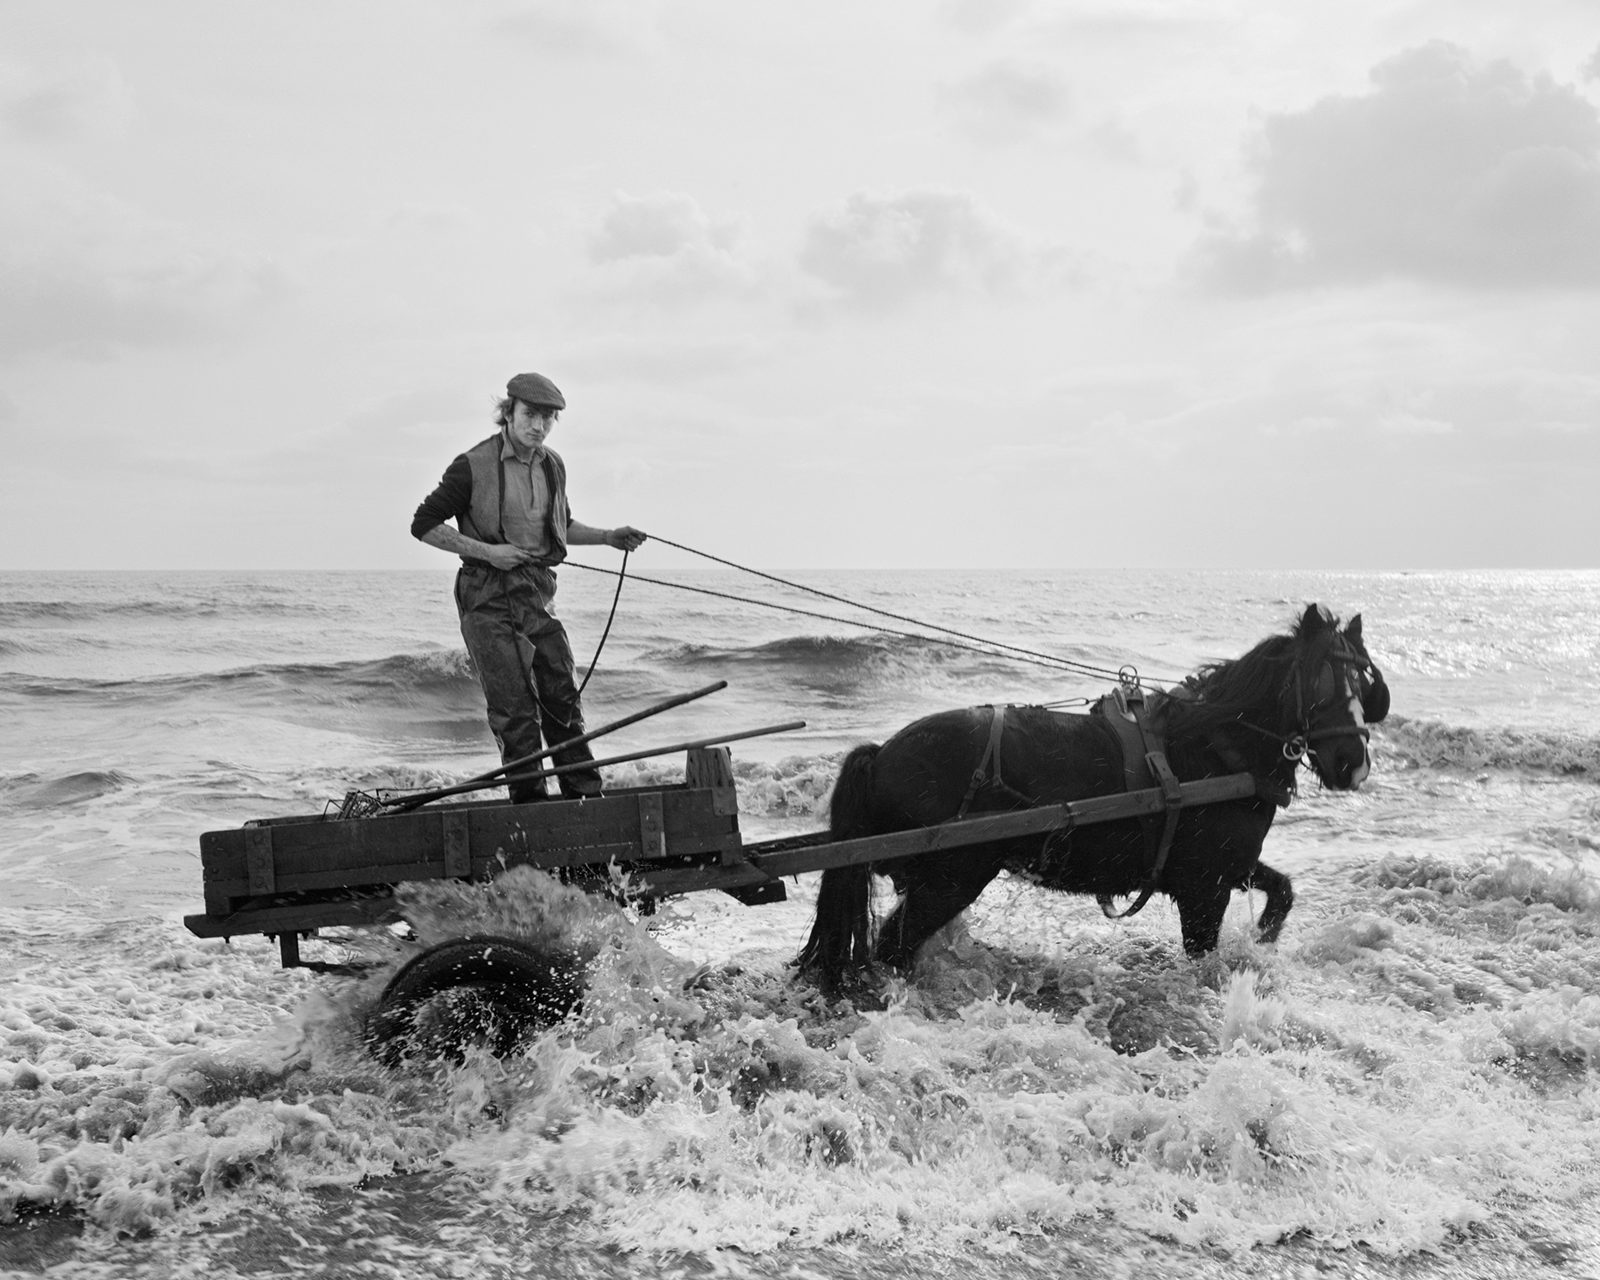 Black and white image of a person steering a horse and cart in the sea, which appears in the new Chris Killip exhibition